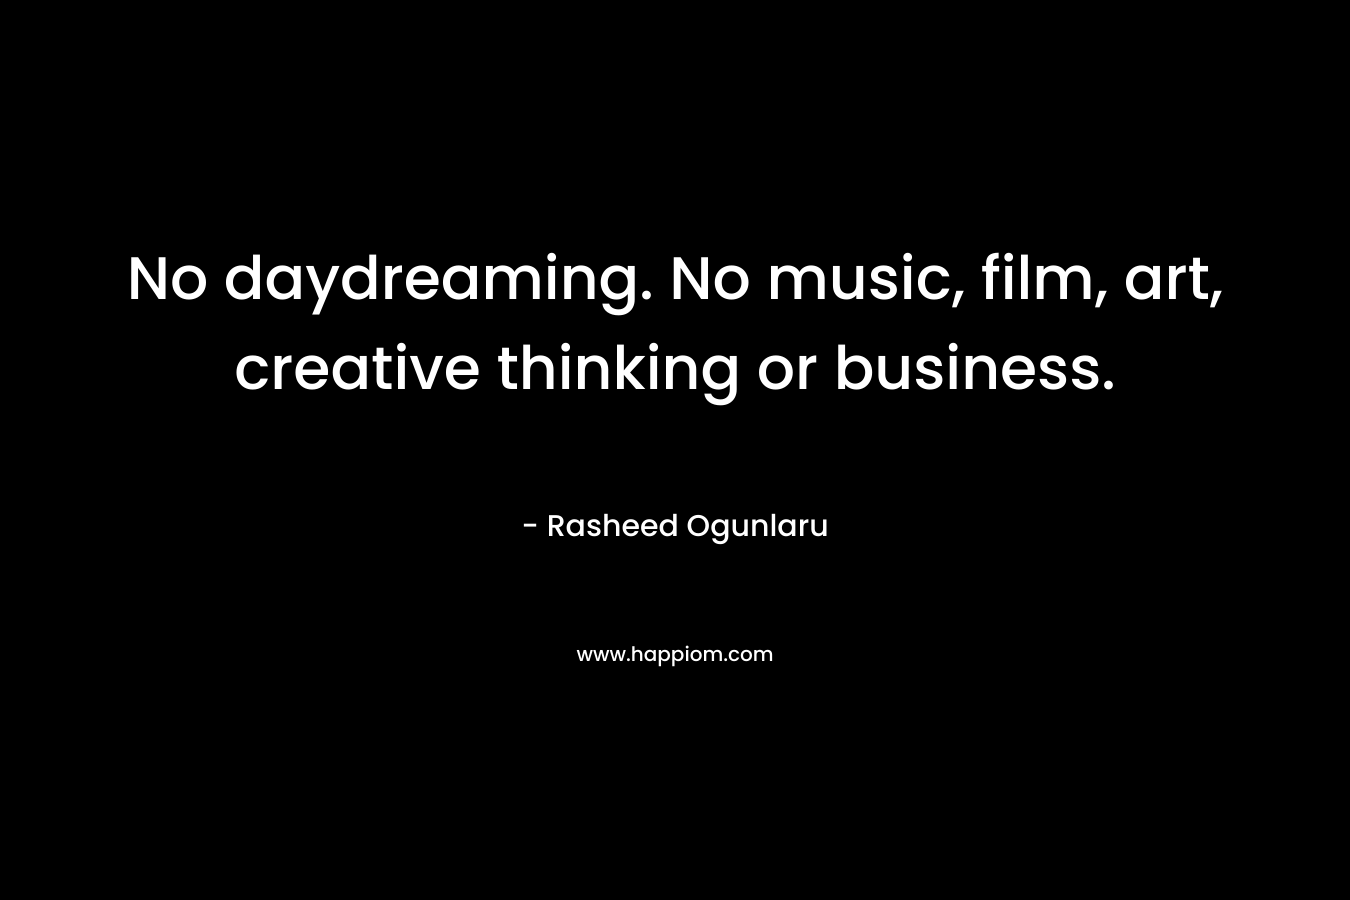 No daydreaming. No music, film, art, creative thinking or business.